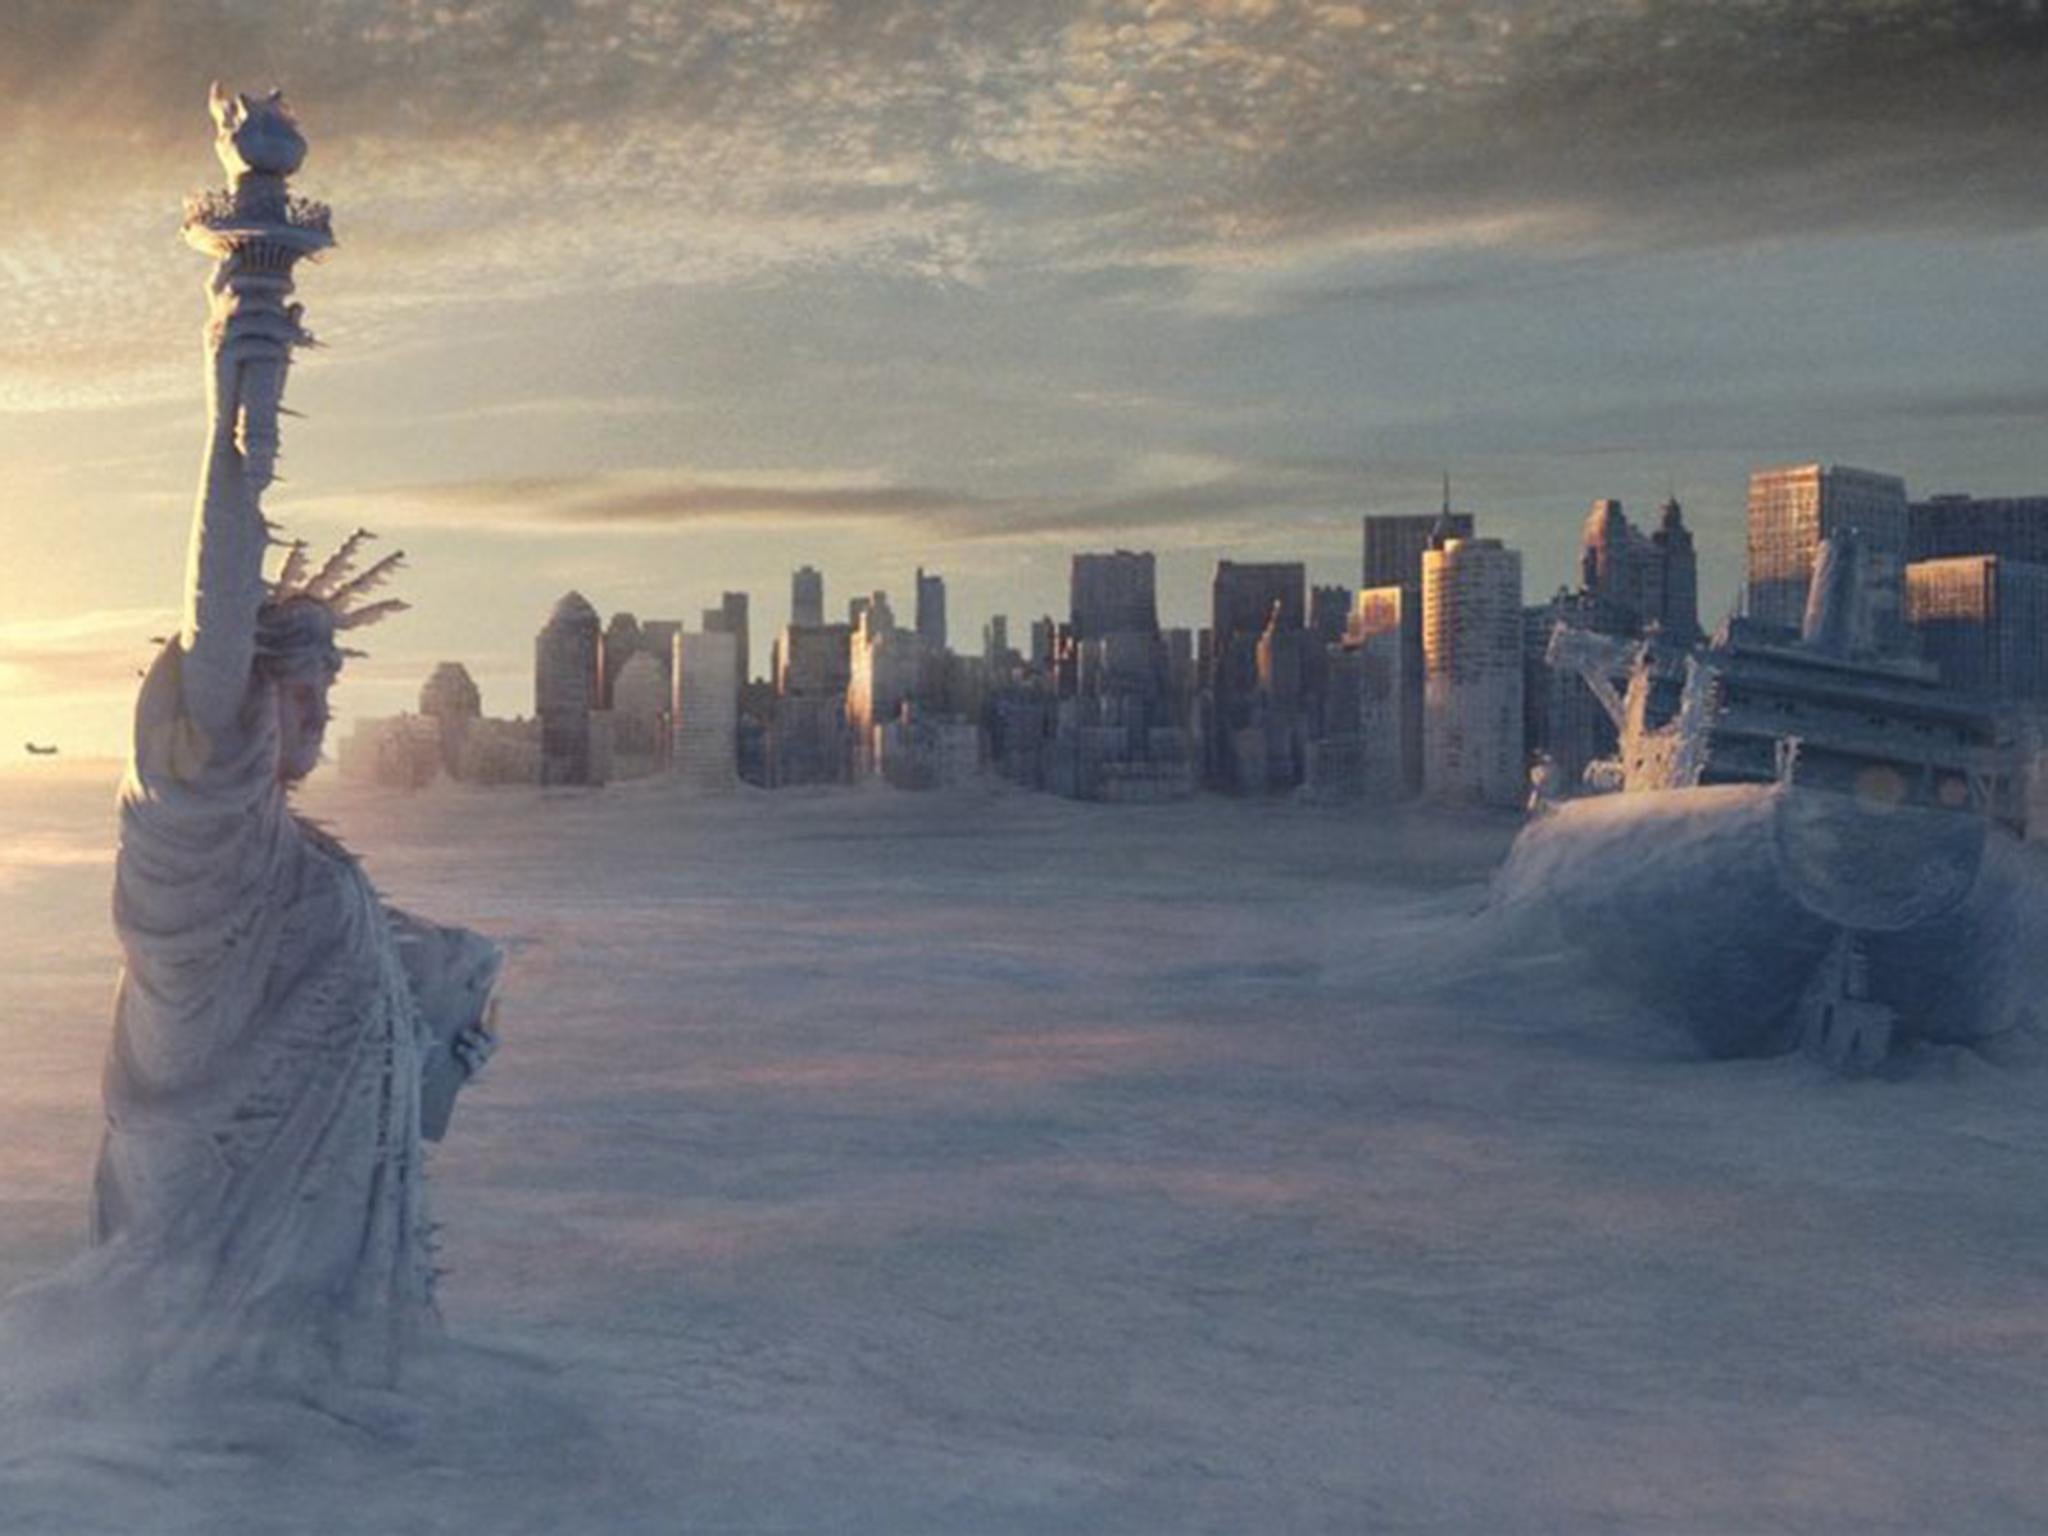 A tsunami floods New York City and the Statue of Liberty in 'The Day After Tomorrow'